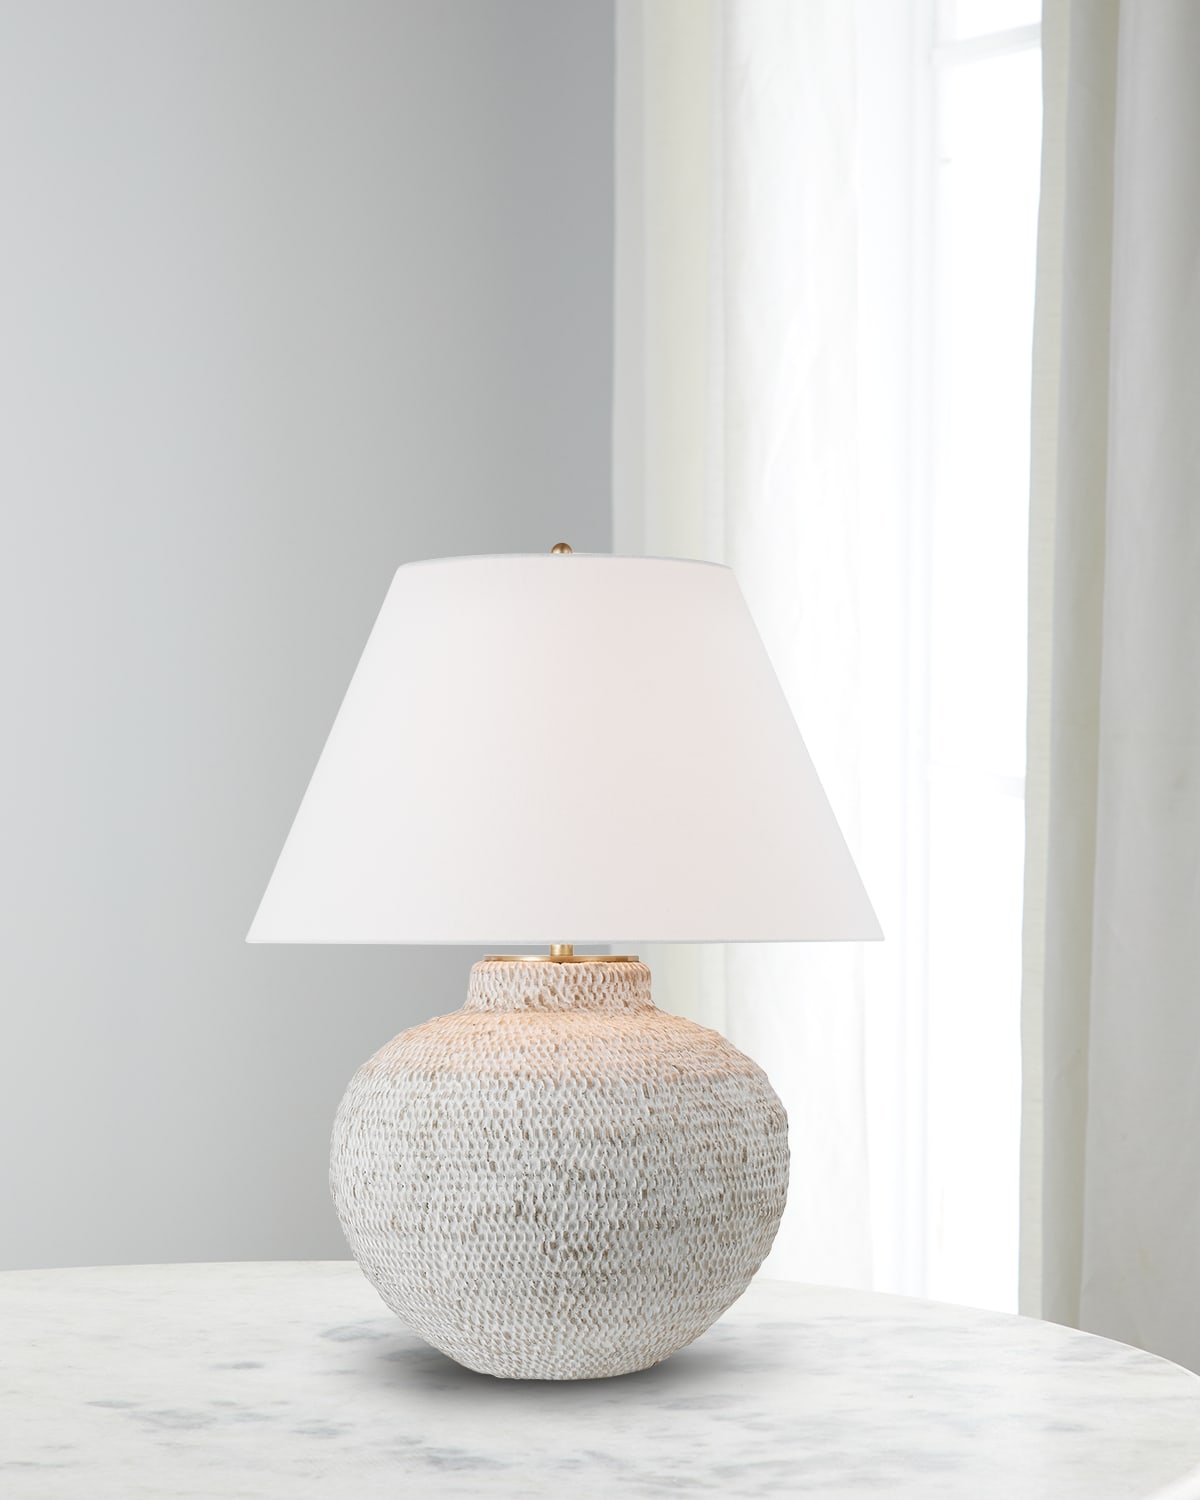 Buy Clemente Table Lamp By Visual Comfort